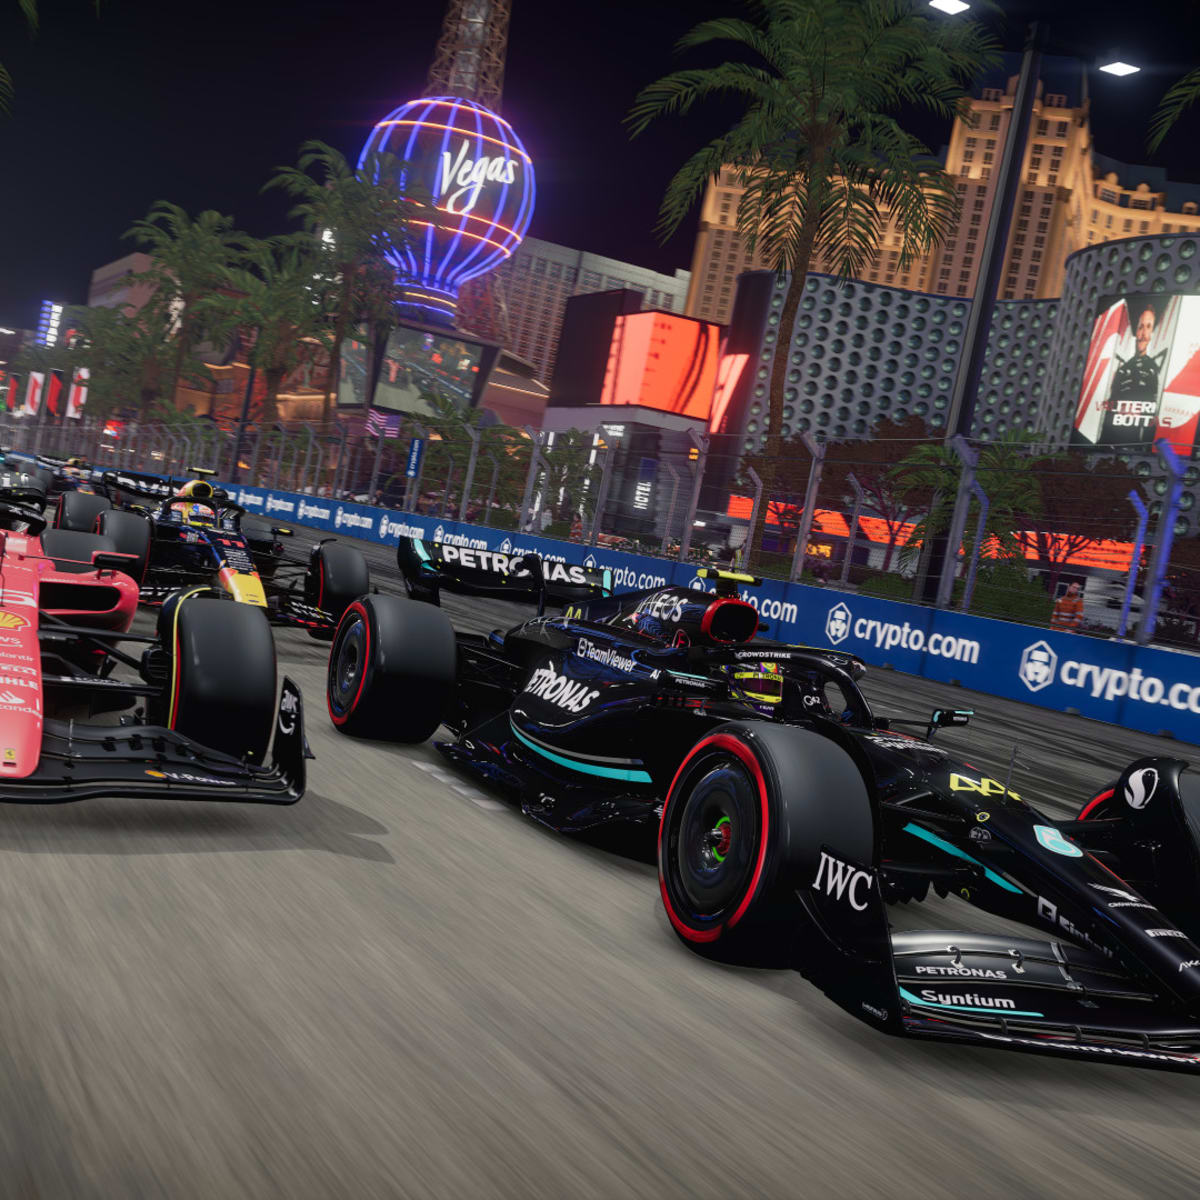 F1 23 update 1.05 patch notes